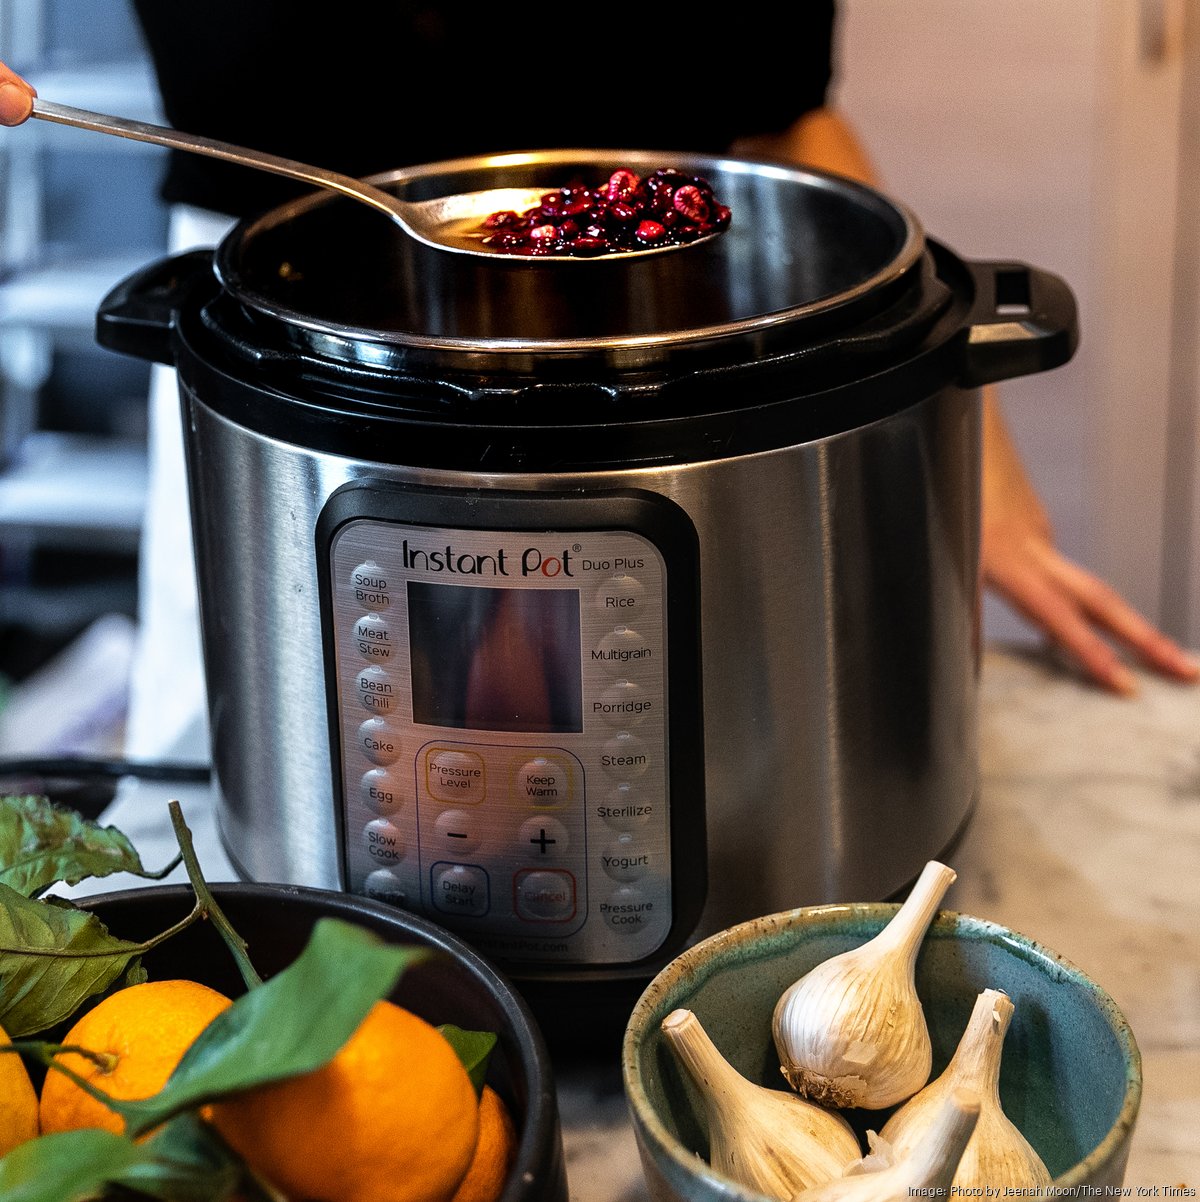 Instant Pot is merging with maker of Corelle, CorningWare - New